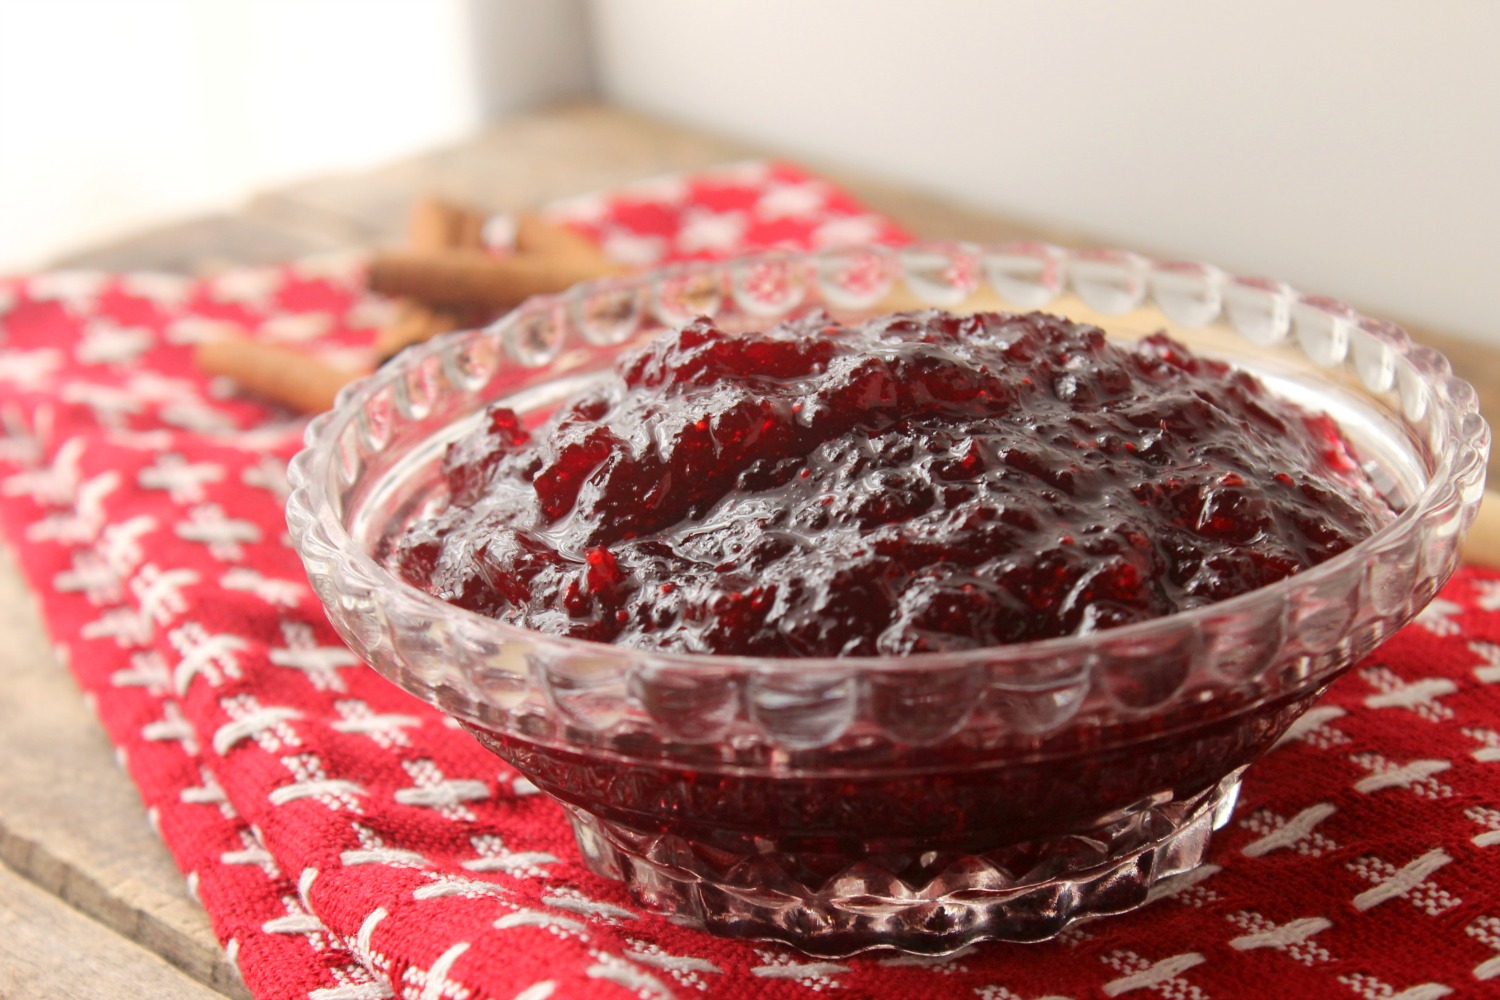 Upgrade your holiday meal with this Easy Homemade Cranberry Sauce!